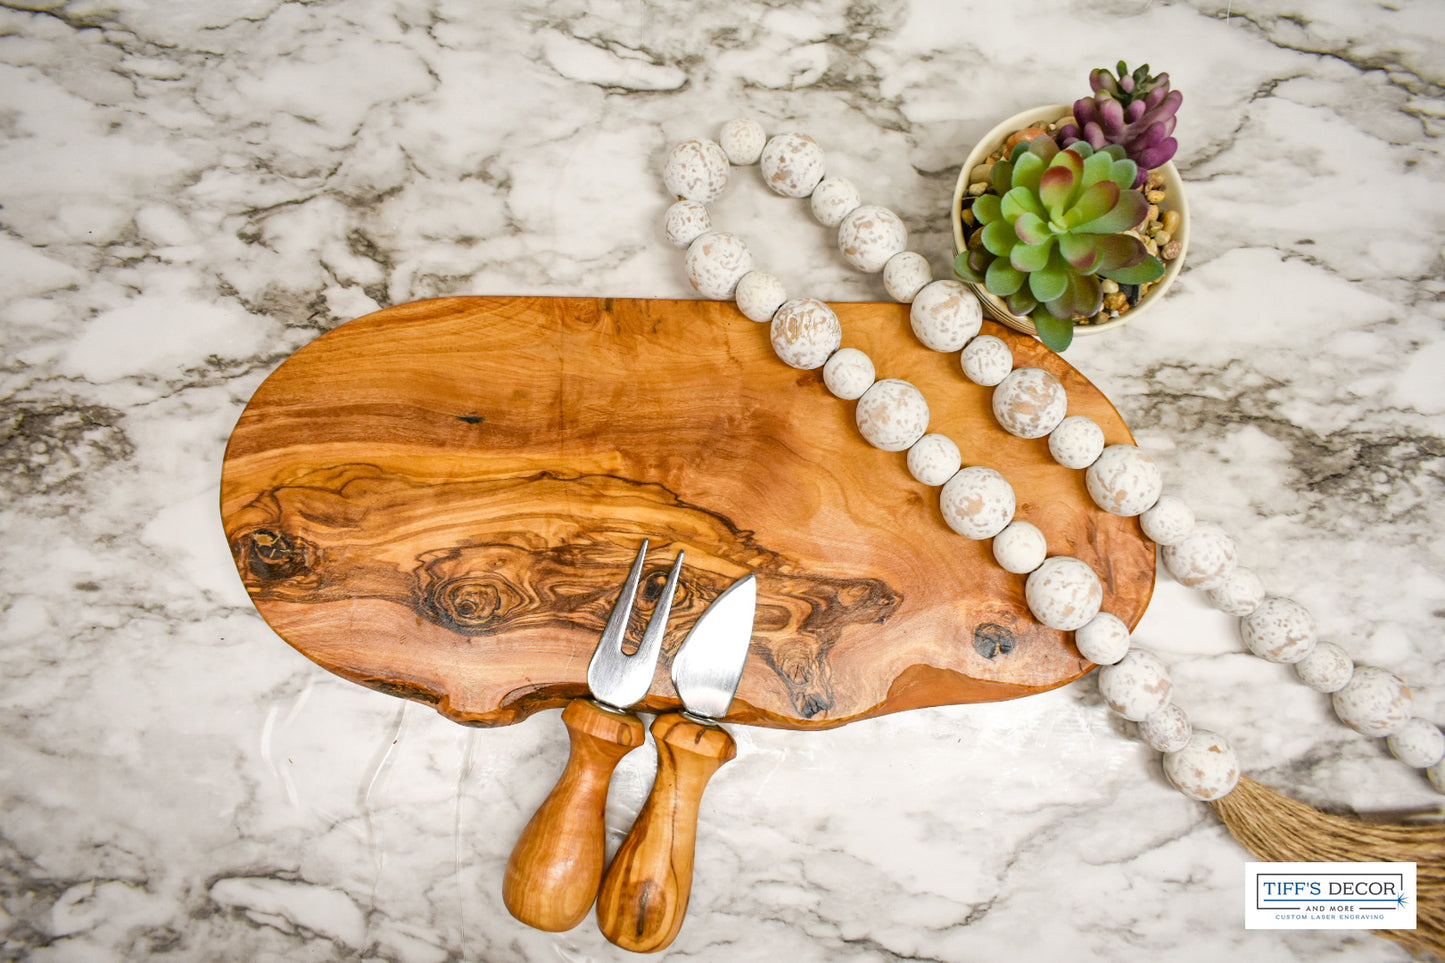 Cheese fork and knife for charcuterie board